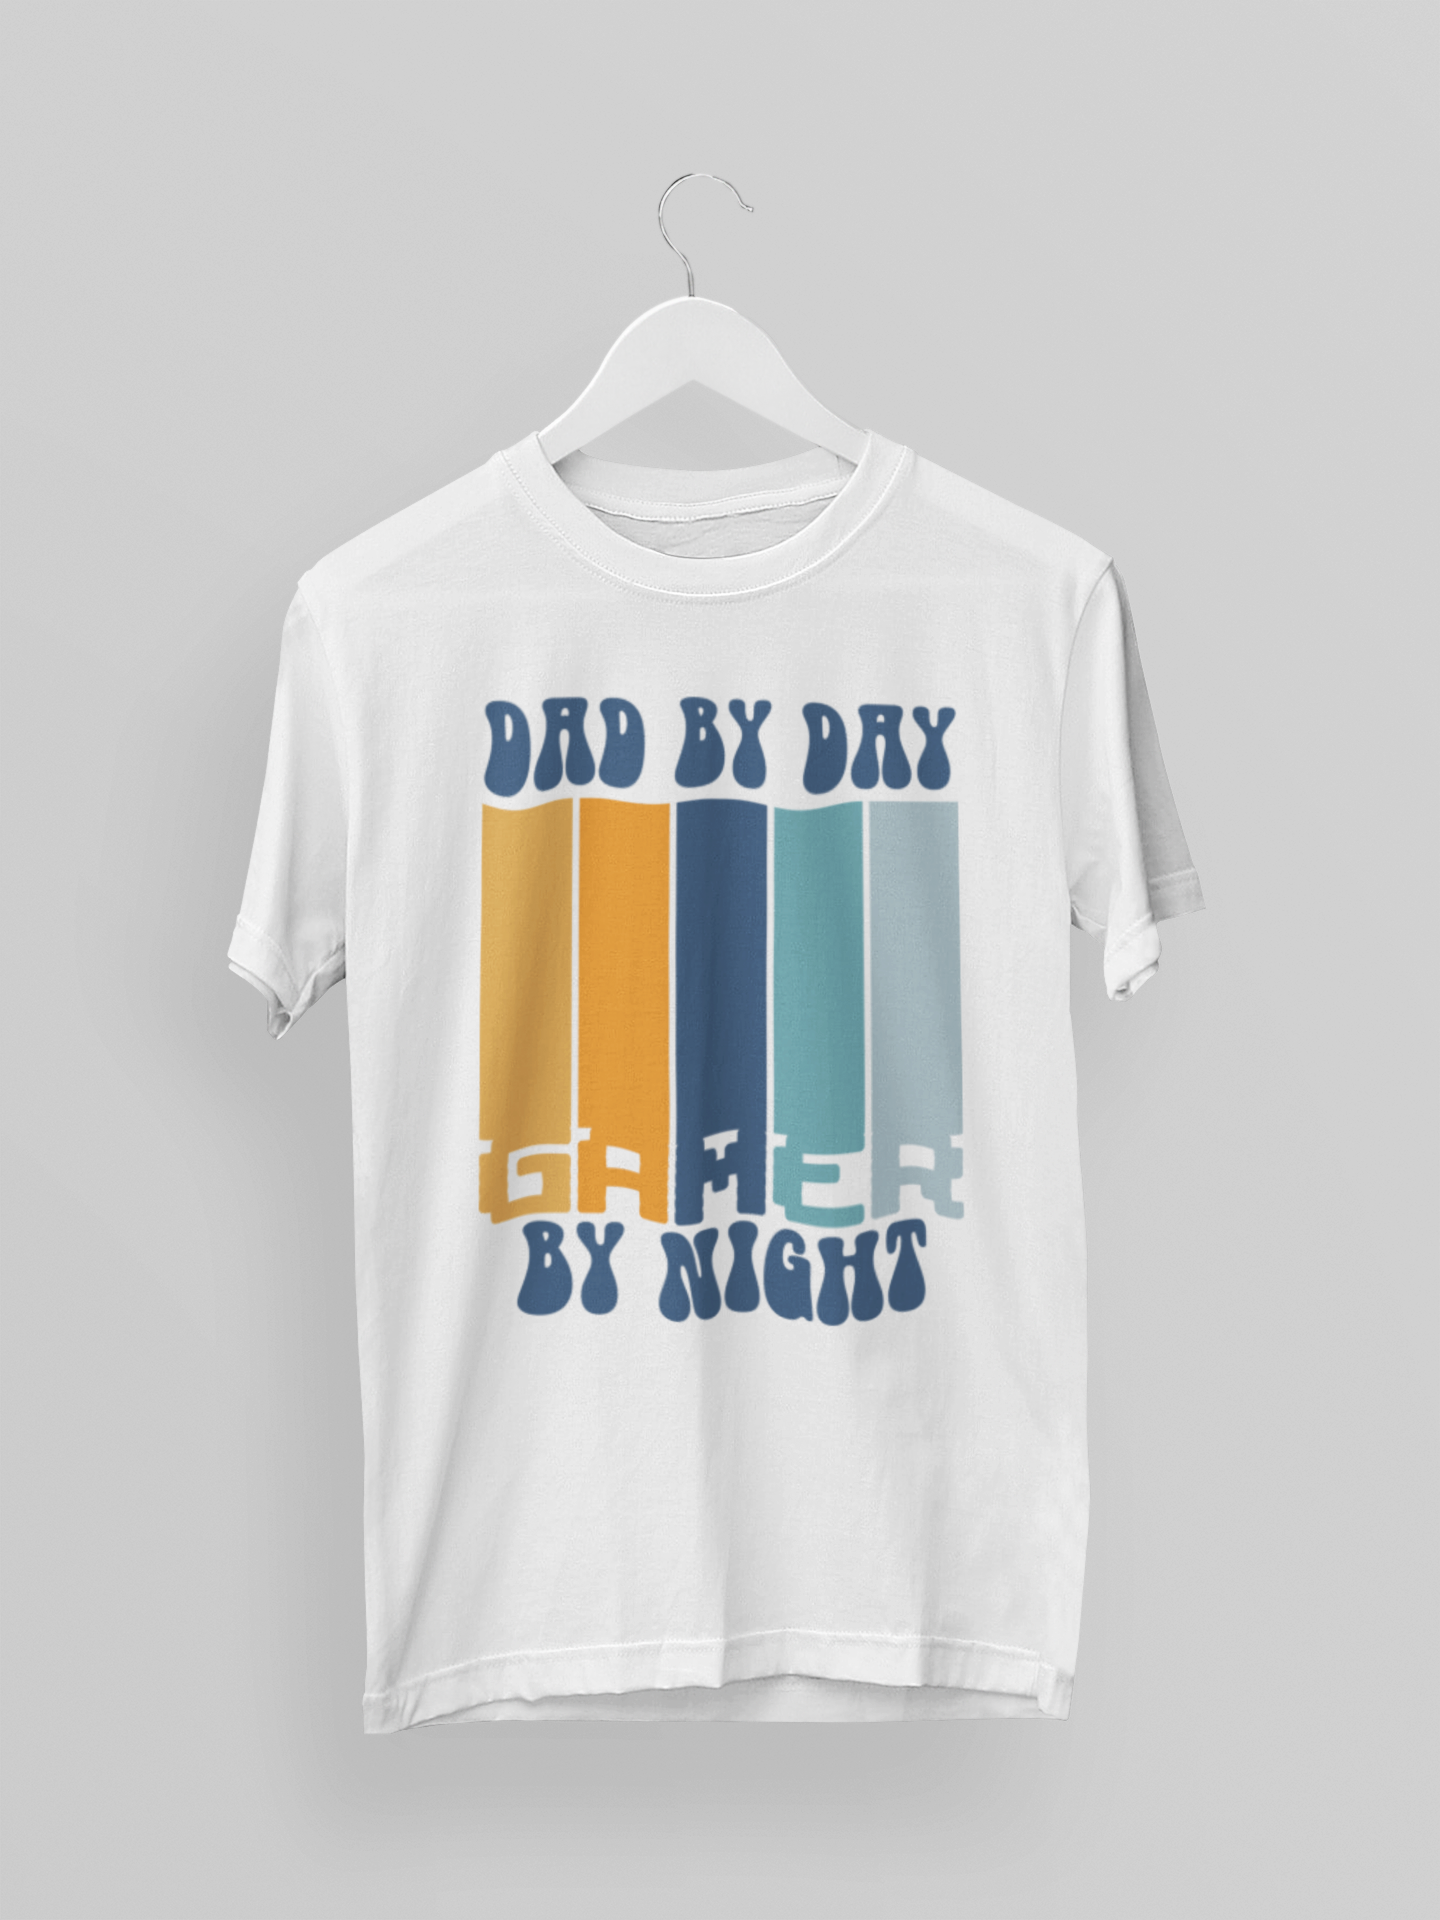 Dad by day Gamer by night T-shirt